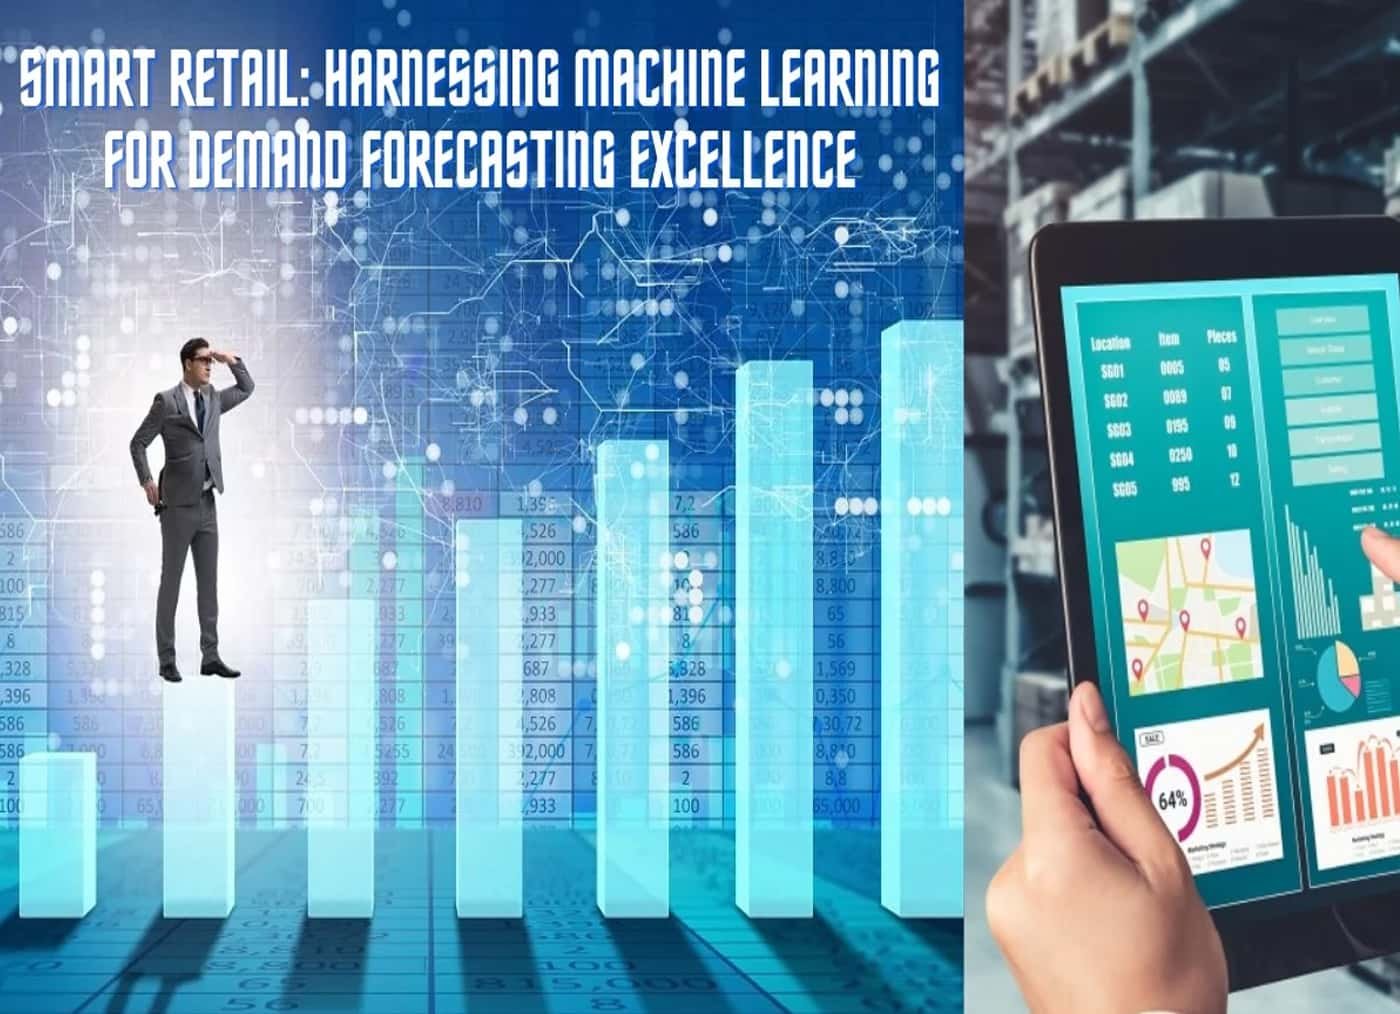 Smart Retail: Harnessing Machine Learning for Retail Demand Forecasting Excellence